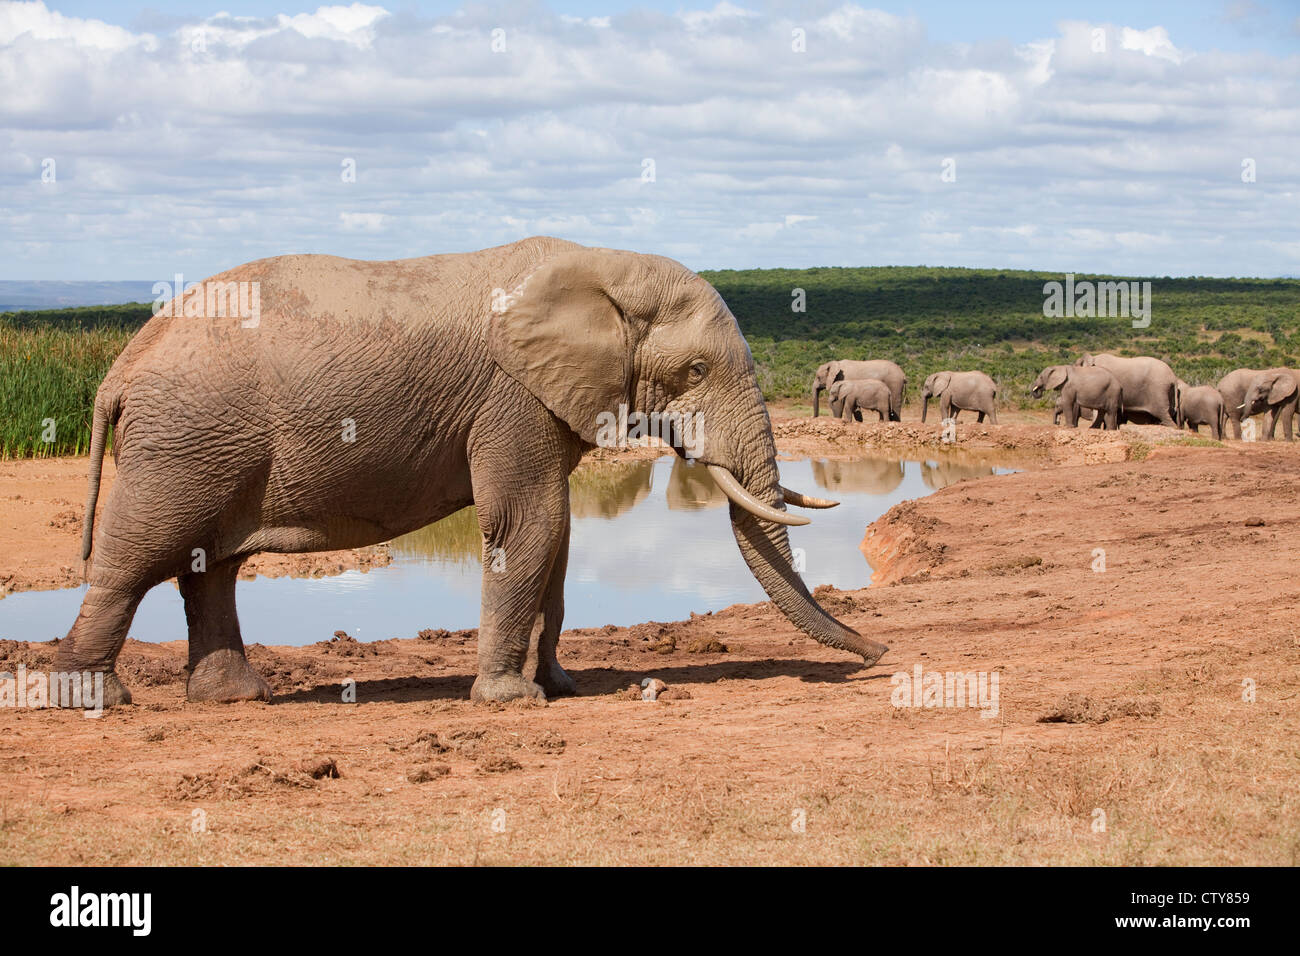 elephant in south africa Stock Photo